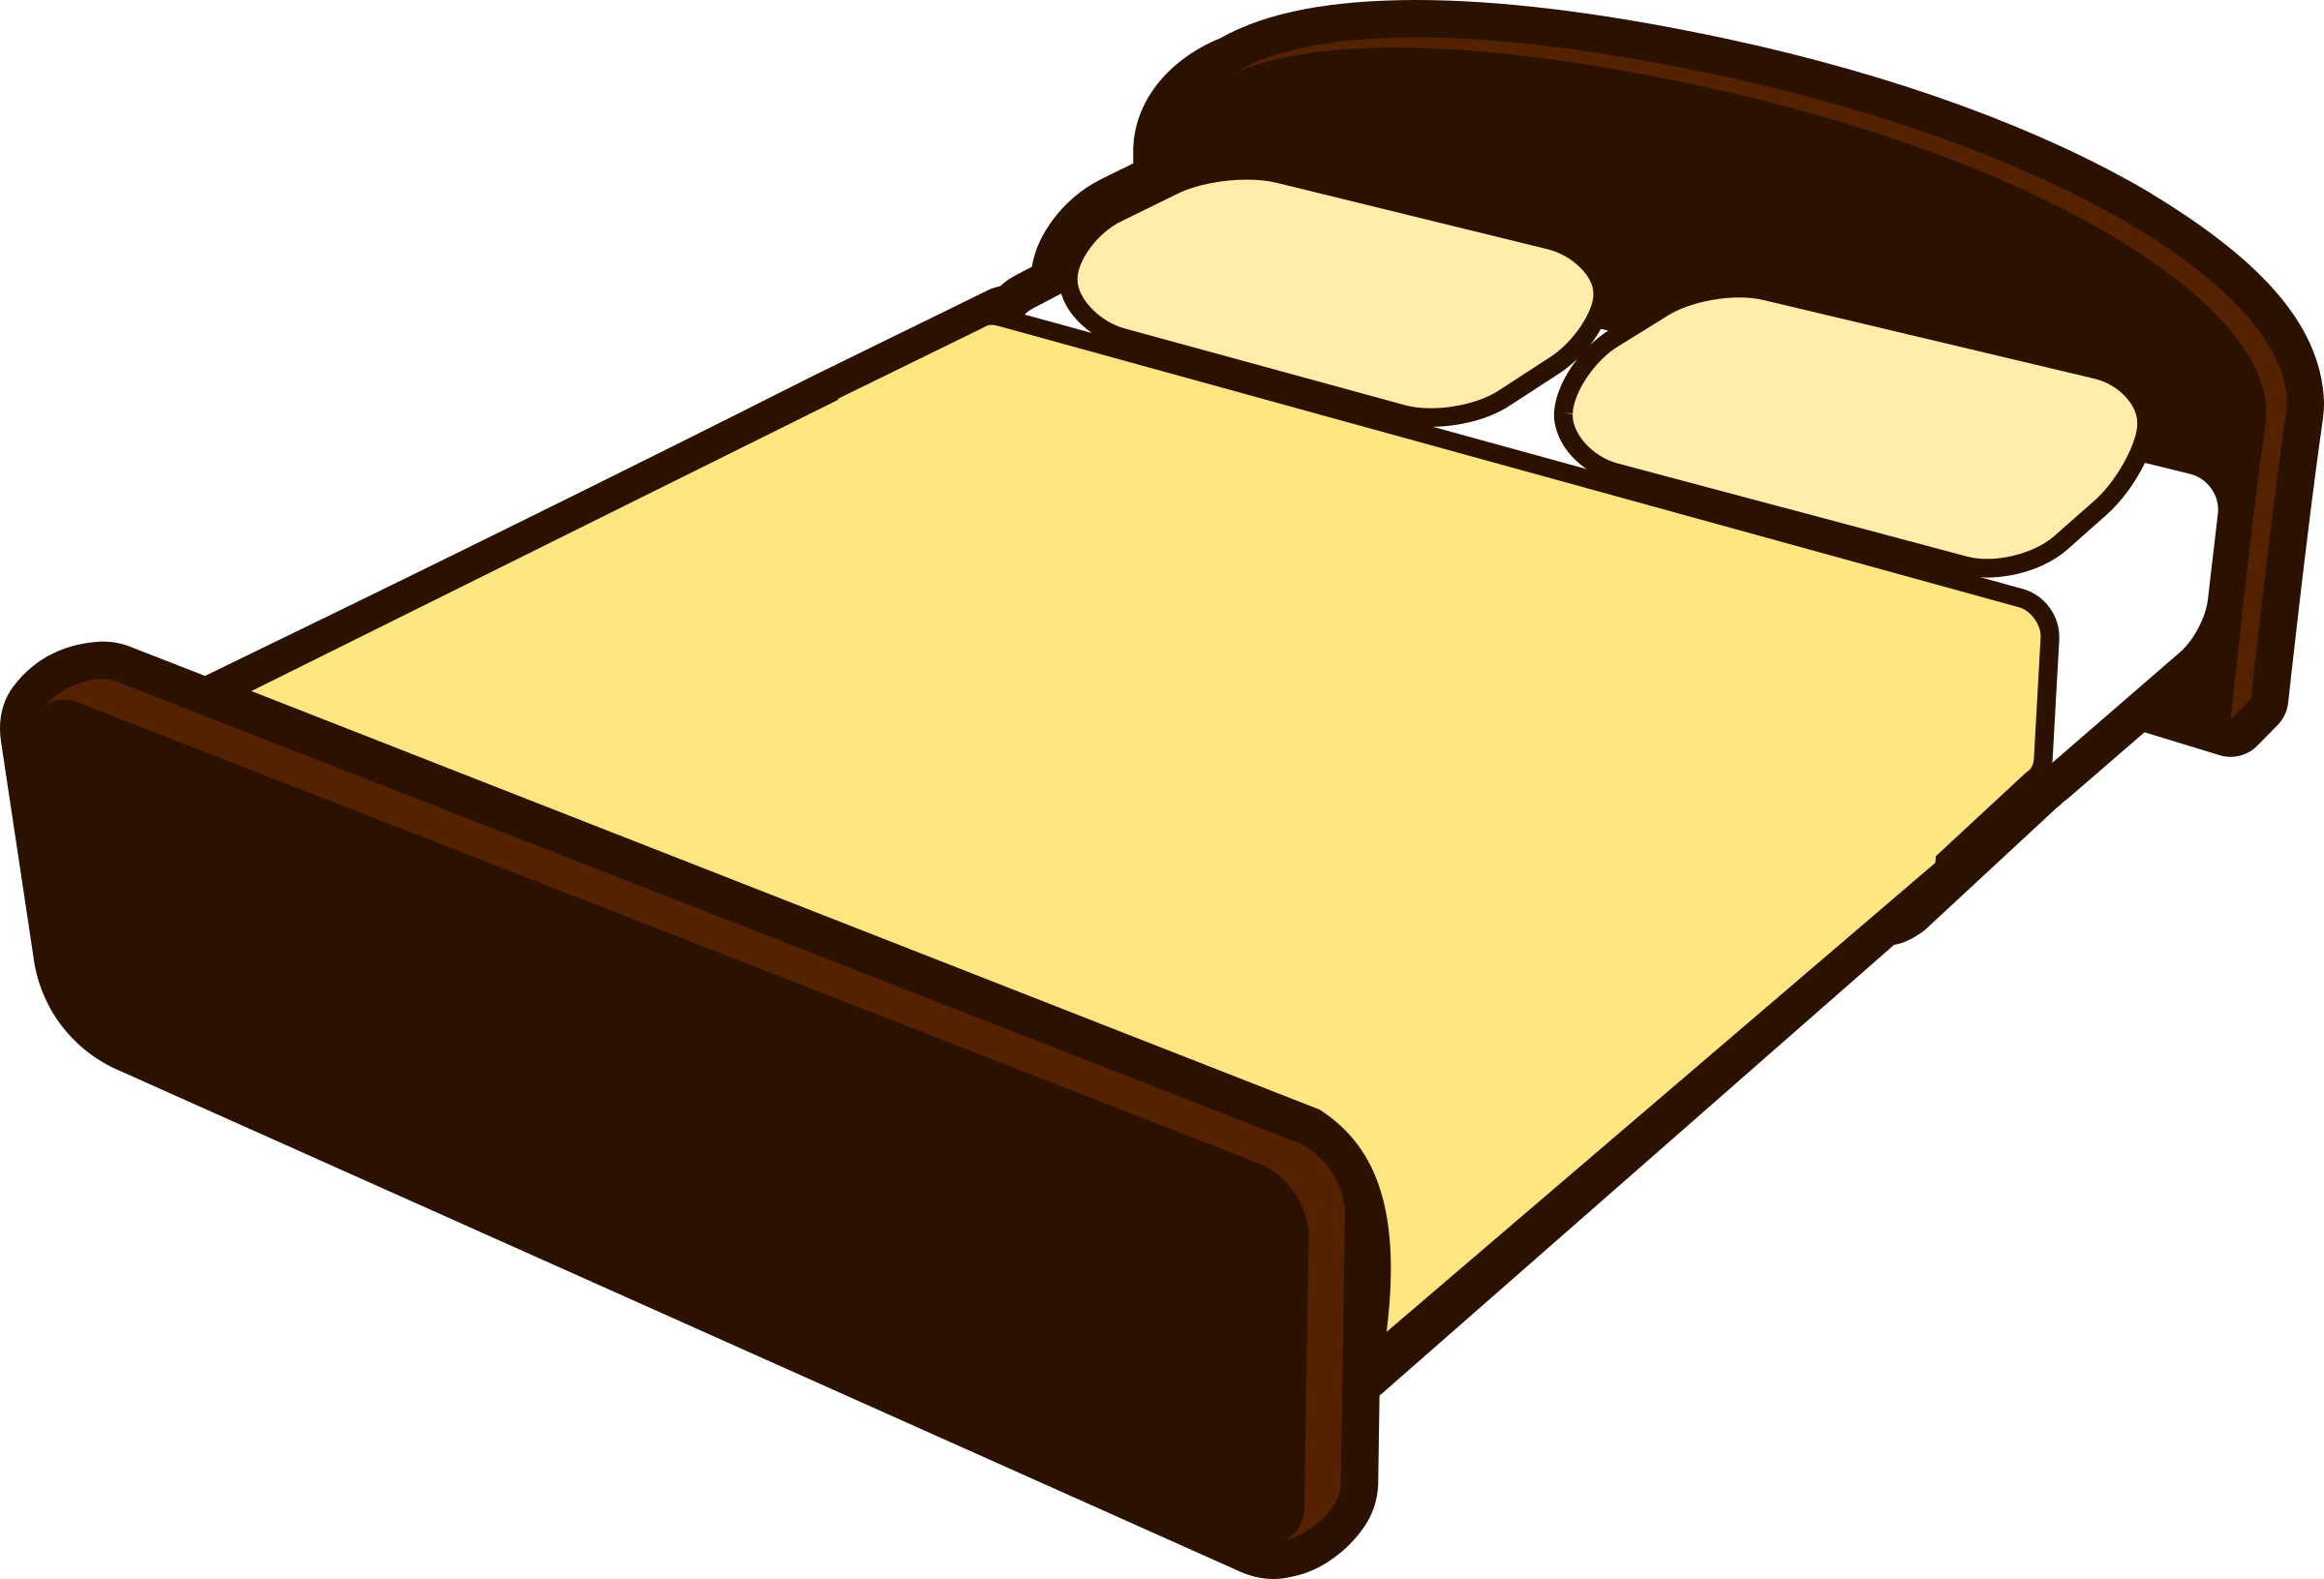 Free Bed Clipart Png, Download Free Clip Art, Free Clip Art